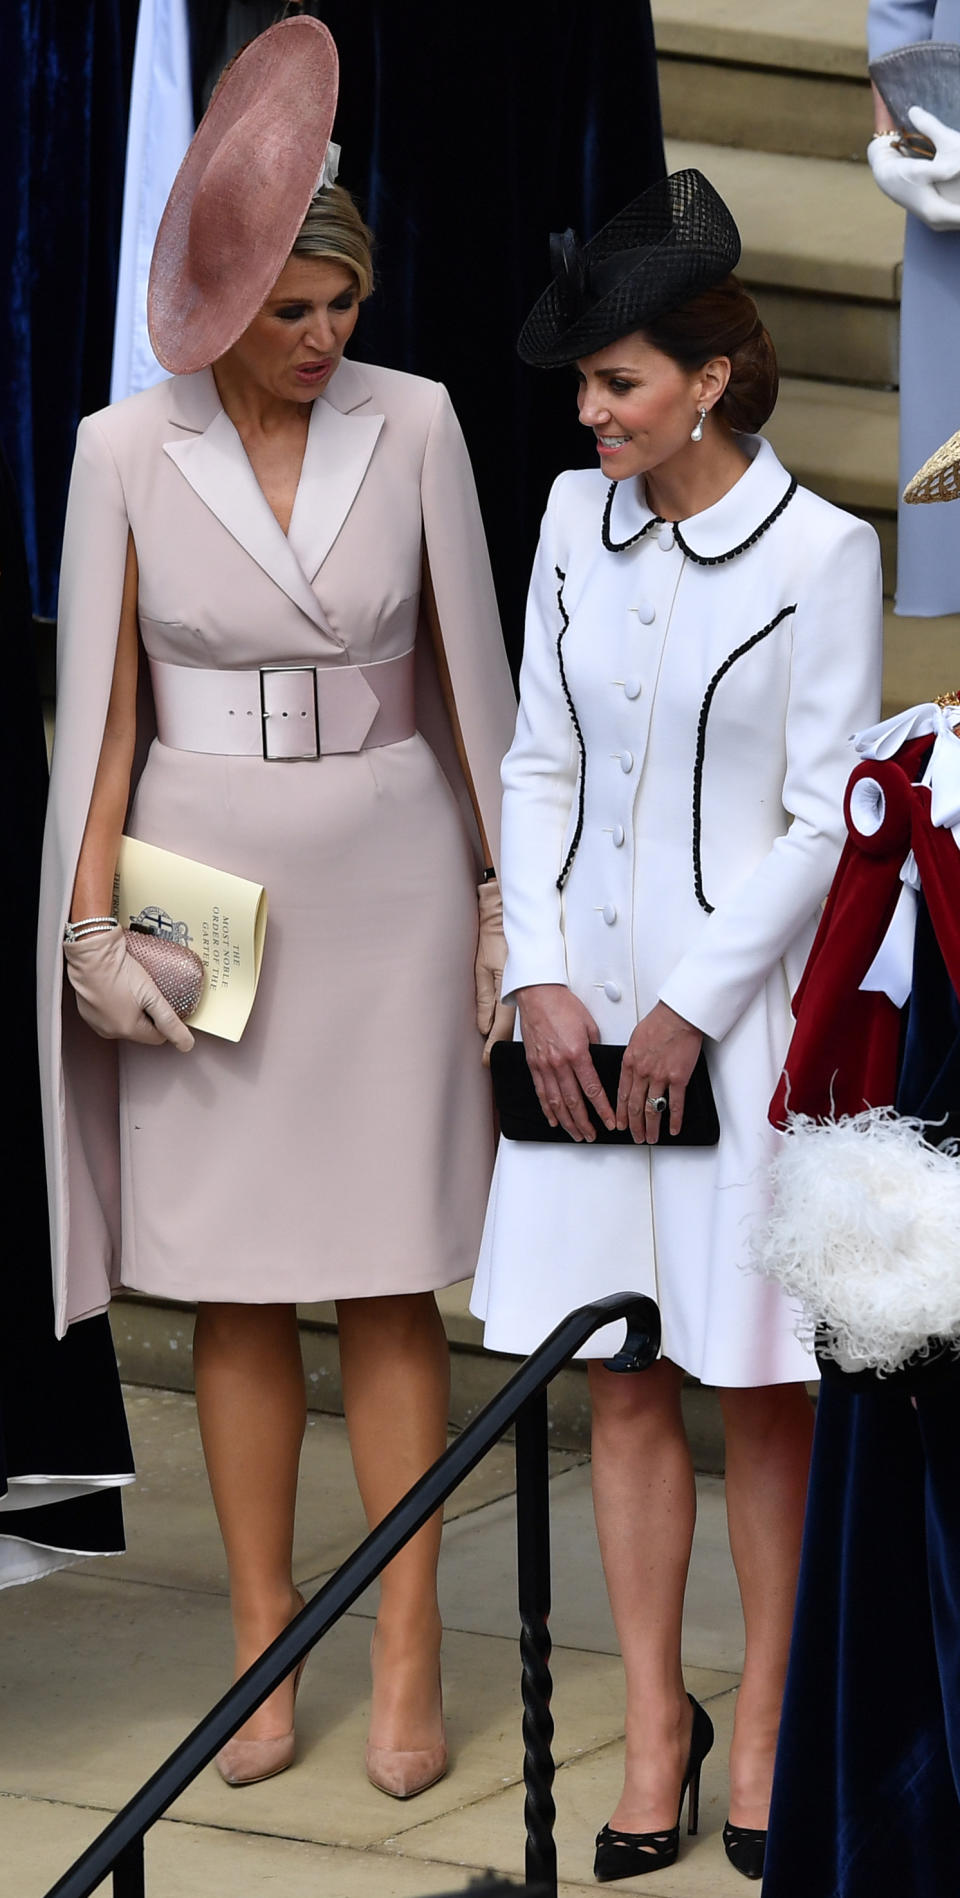 Netherlands' Queen Maxima (L) talks with Britain's Catherine, Duchess of Cambridge as they leave from St George's Chapel after attending the Most Noble Order of the Garter Ceremony in Windsor Castle in Windsor, west of London on June 17, 2019. - The Order of the Garter is the oldest and most senior Order of Chivalry in Britain, established by King Edward III nearly 700 years ago. (Photo by Ben STANSALL / various sources / AFP)        (Photo credit should read BEN STANSALL/AFP/Getty Images)